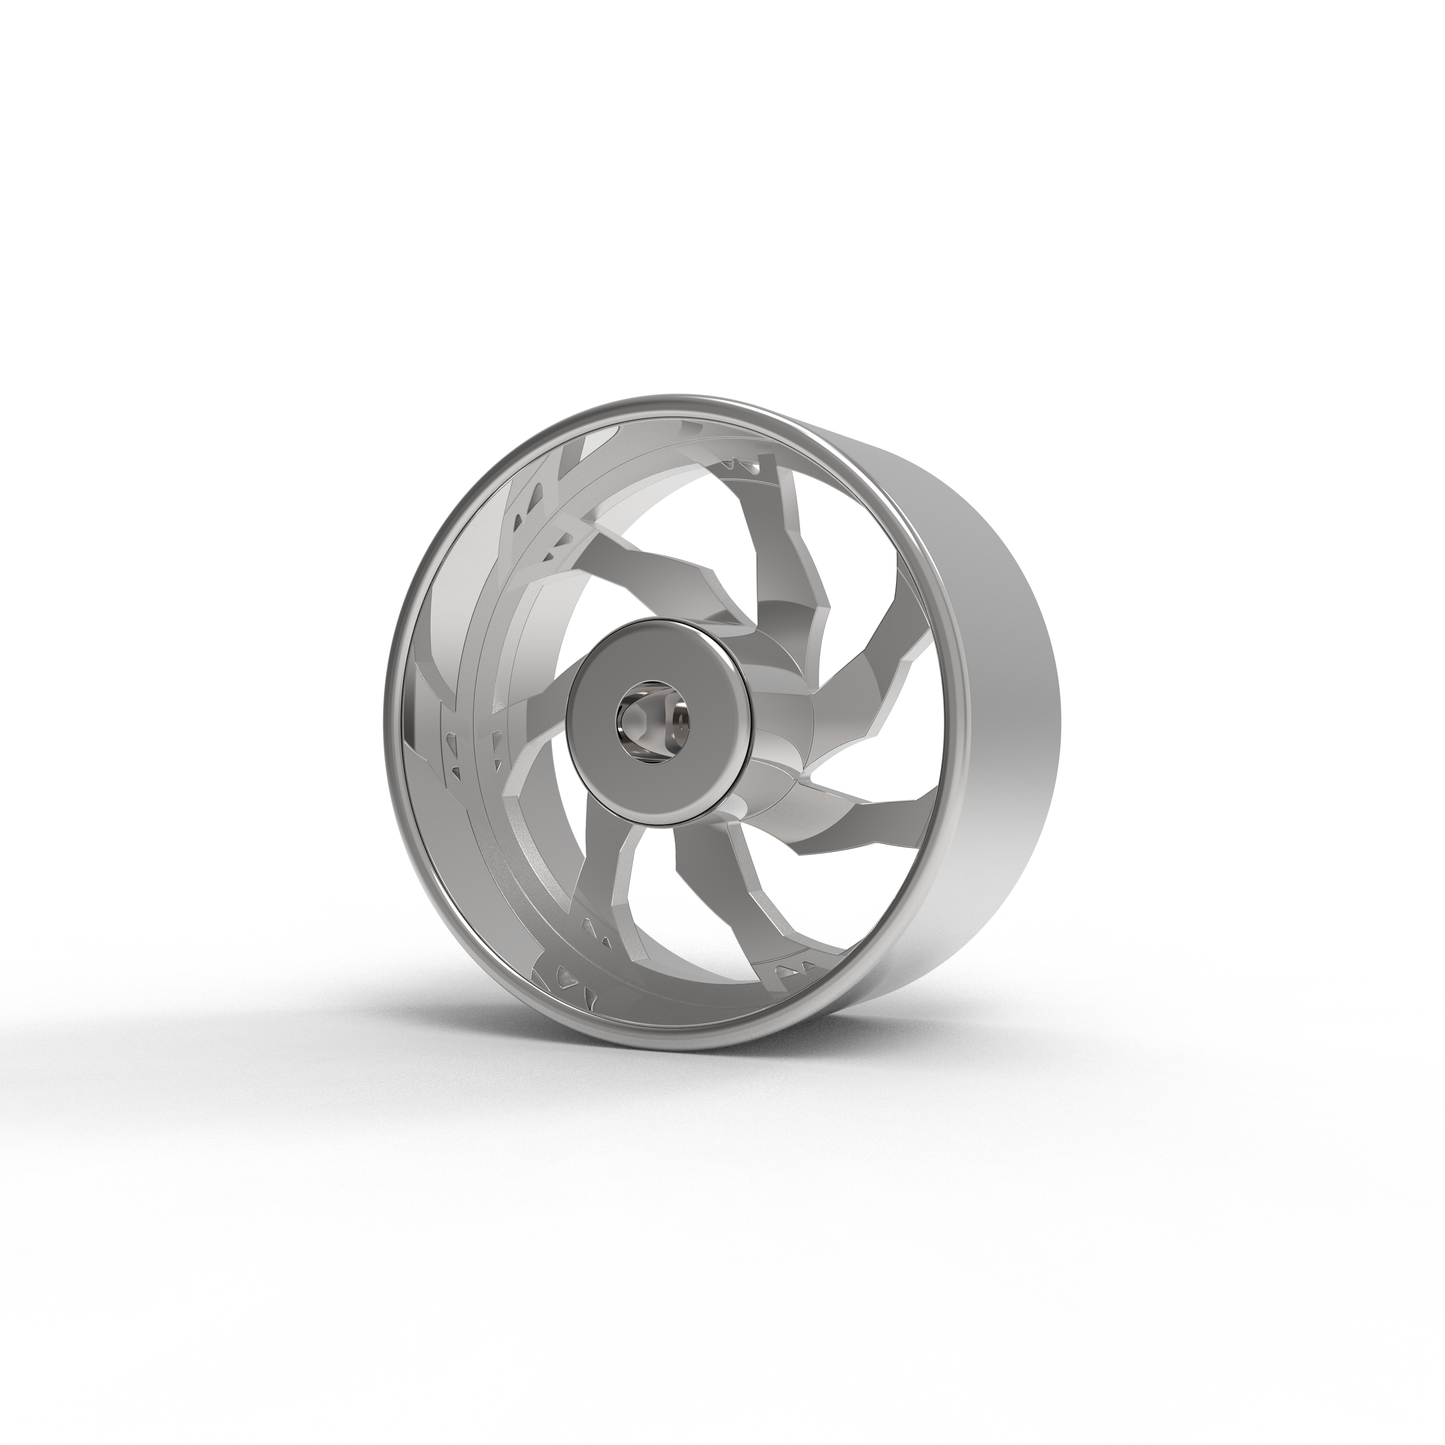 RUCCI FORGED MIXIN WHEEL 3D MODEL